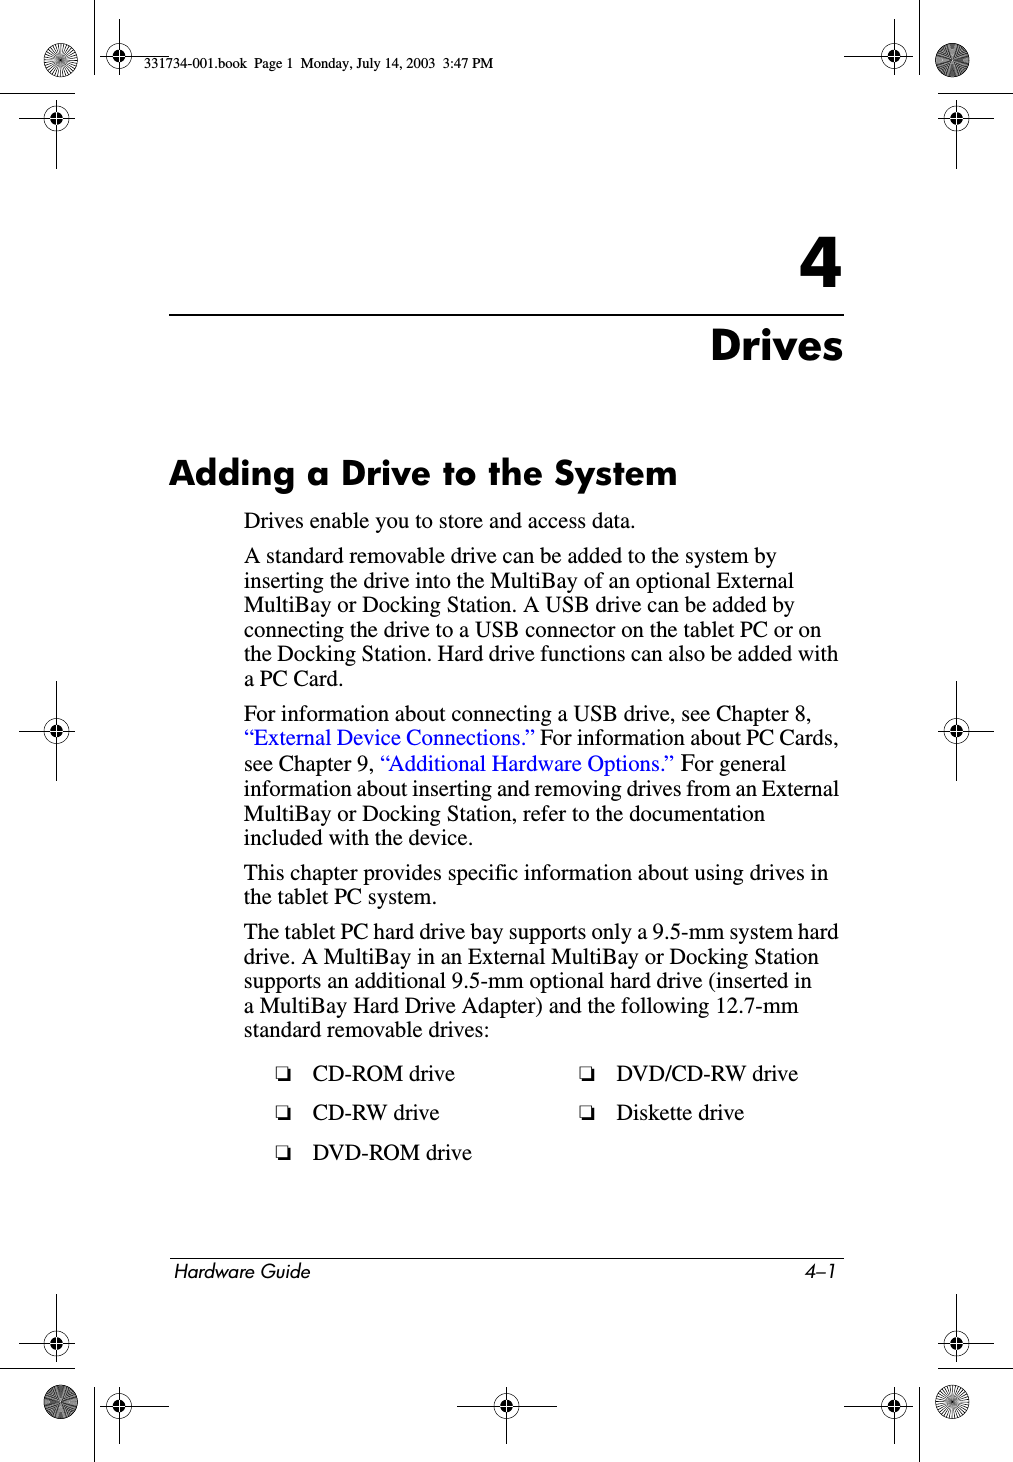 Hardware Guide 4–14DrivesAdding a Drive to the SystemDrives enable you to store and access data.A standard removable drive can be added to the system by inserting the drive into the MultiBay of an optional External MultiBay or Docking Station. A USB drive can be added by connecting the drive to a USB connector on the tablet PC or on the Docking Station. Hard drive functions can also be added with aPCCard.For information about connecting a USB drive, see Chapter 8, “External Device Connections.” For information about PC Cards, see Chapter 9, “Additional Hardware Options.” For general information about inserting and removing drives from an External MultiBay or Docking Station, refer to the documentation included with the device.This chapter provides specific information about using drives in the tablet PC system.The tablet PC hard drive bay supports only a 9.5-mm system hard drive. A MultiBay in an External MultiBay or Docking Station supports an additional 9.5-mm optional hard drive (inserted in a MultiBay Hard Drive Adapter) and the following 12.7-mm standard removable drives:❏CD-ROM drive  ❏DVD/CD-RW drive❏CD-RW drive ❏Diskette drive❏DVD-ROM drive331734-001.book  Page 1  Monday, July 14, 2003  3:47 PM